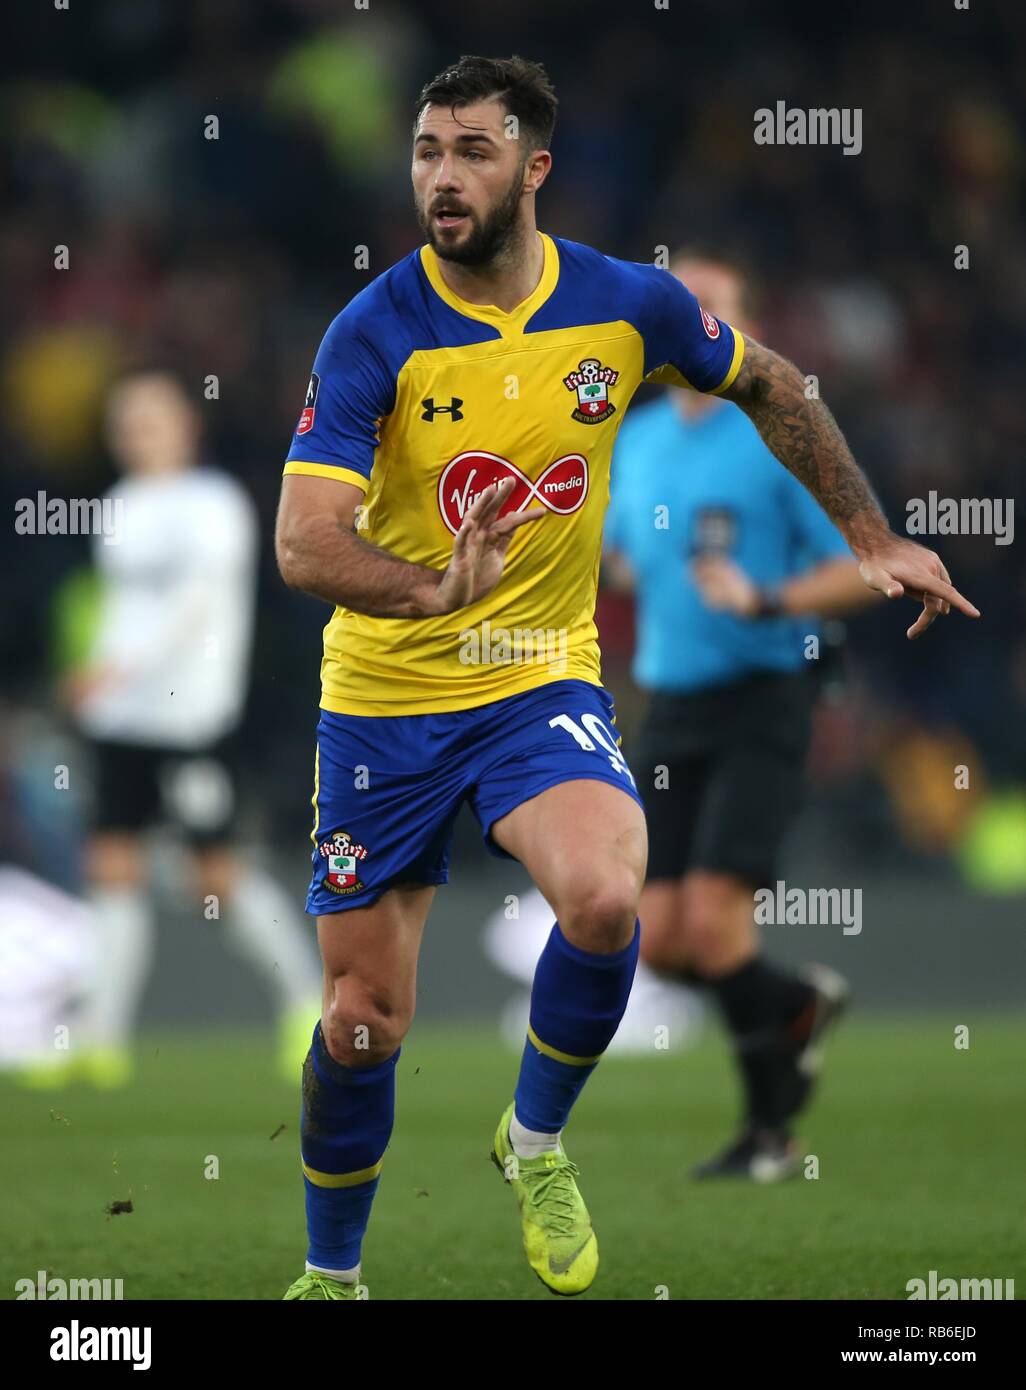 CHARLIE AUSTIN, Southampton FC, DERBY COUNTY V SOUTHAMPTON, die Emirate FA Cup 3. Runde, 2019 Stockfoto